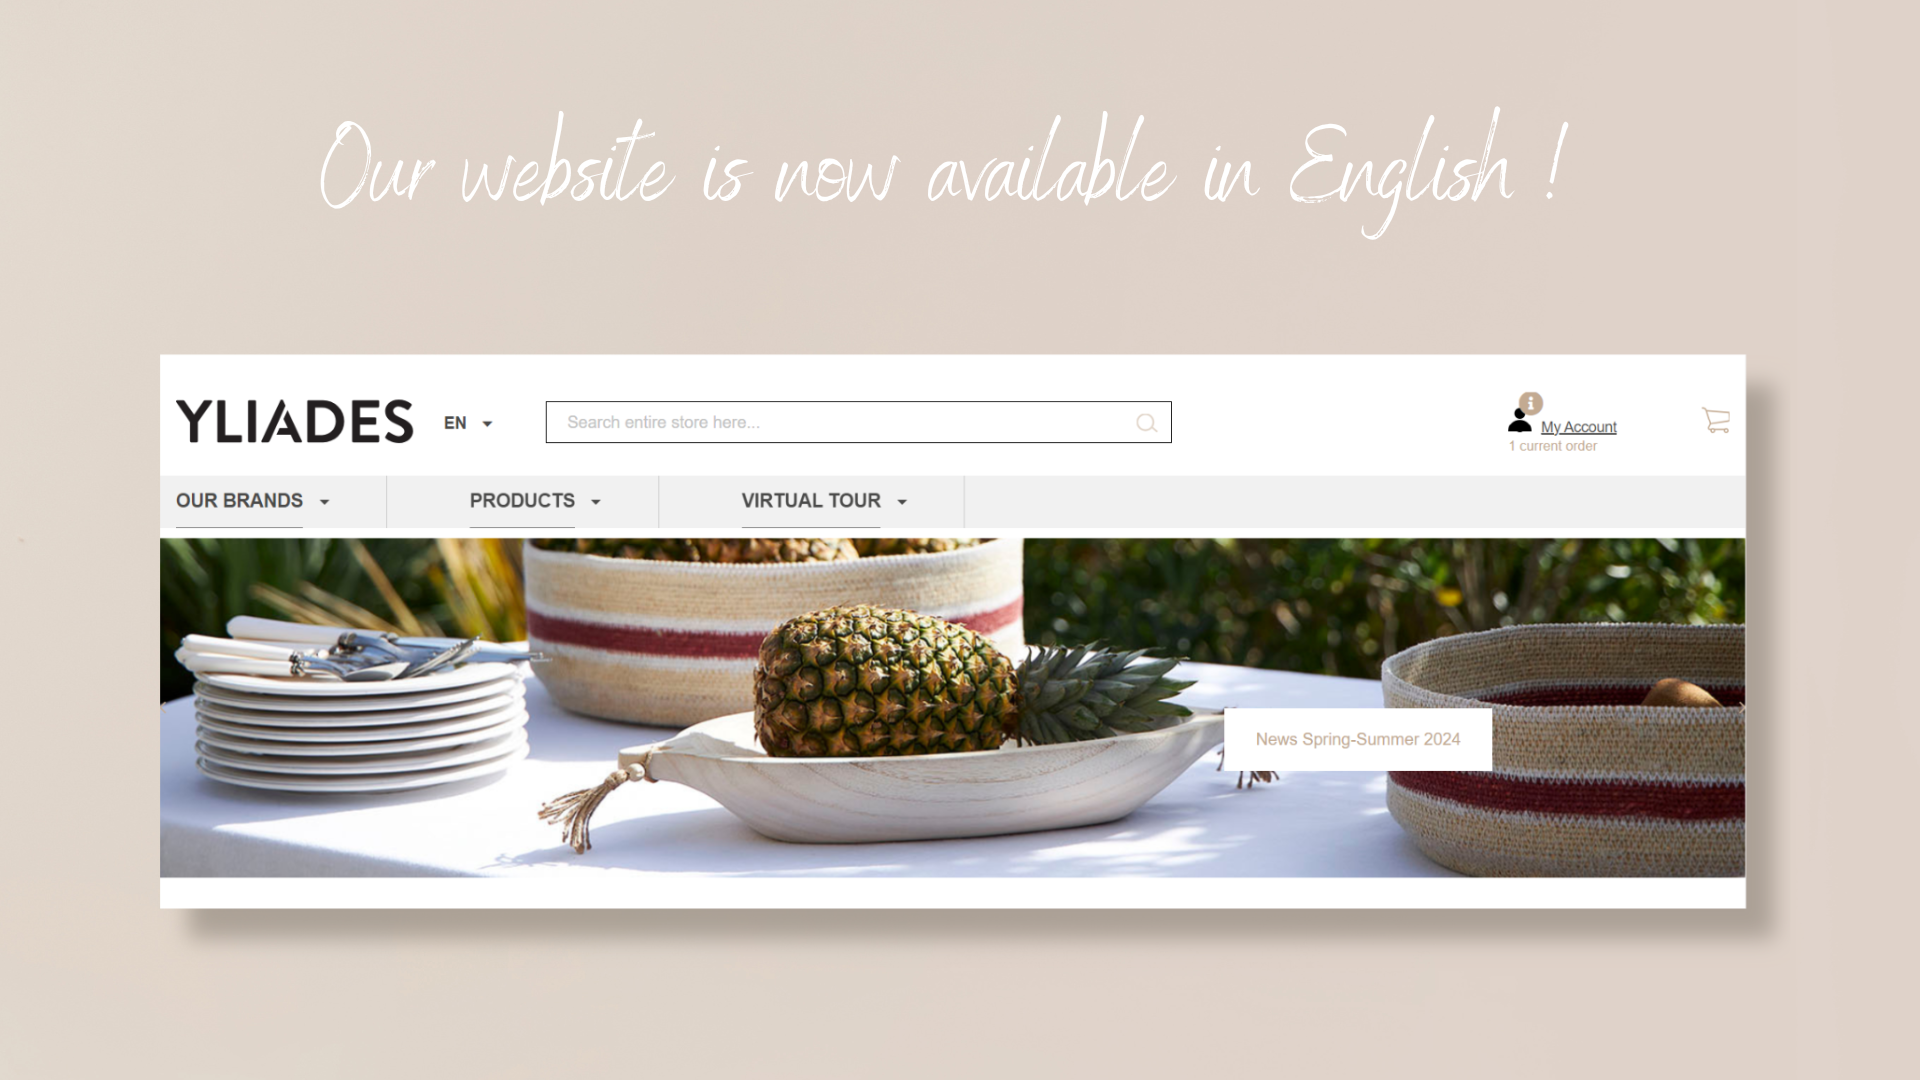 Our website is now available in English